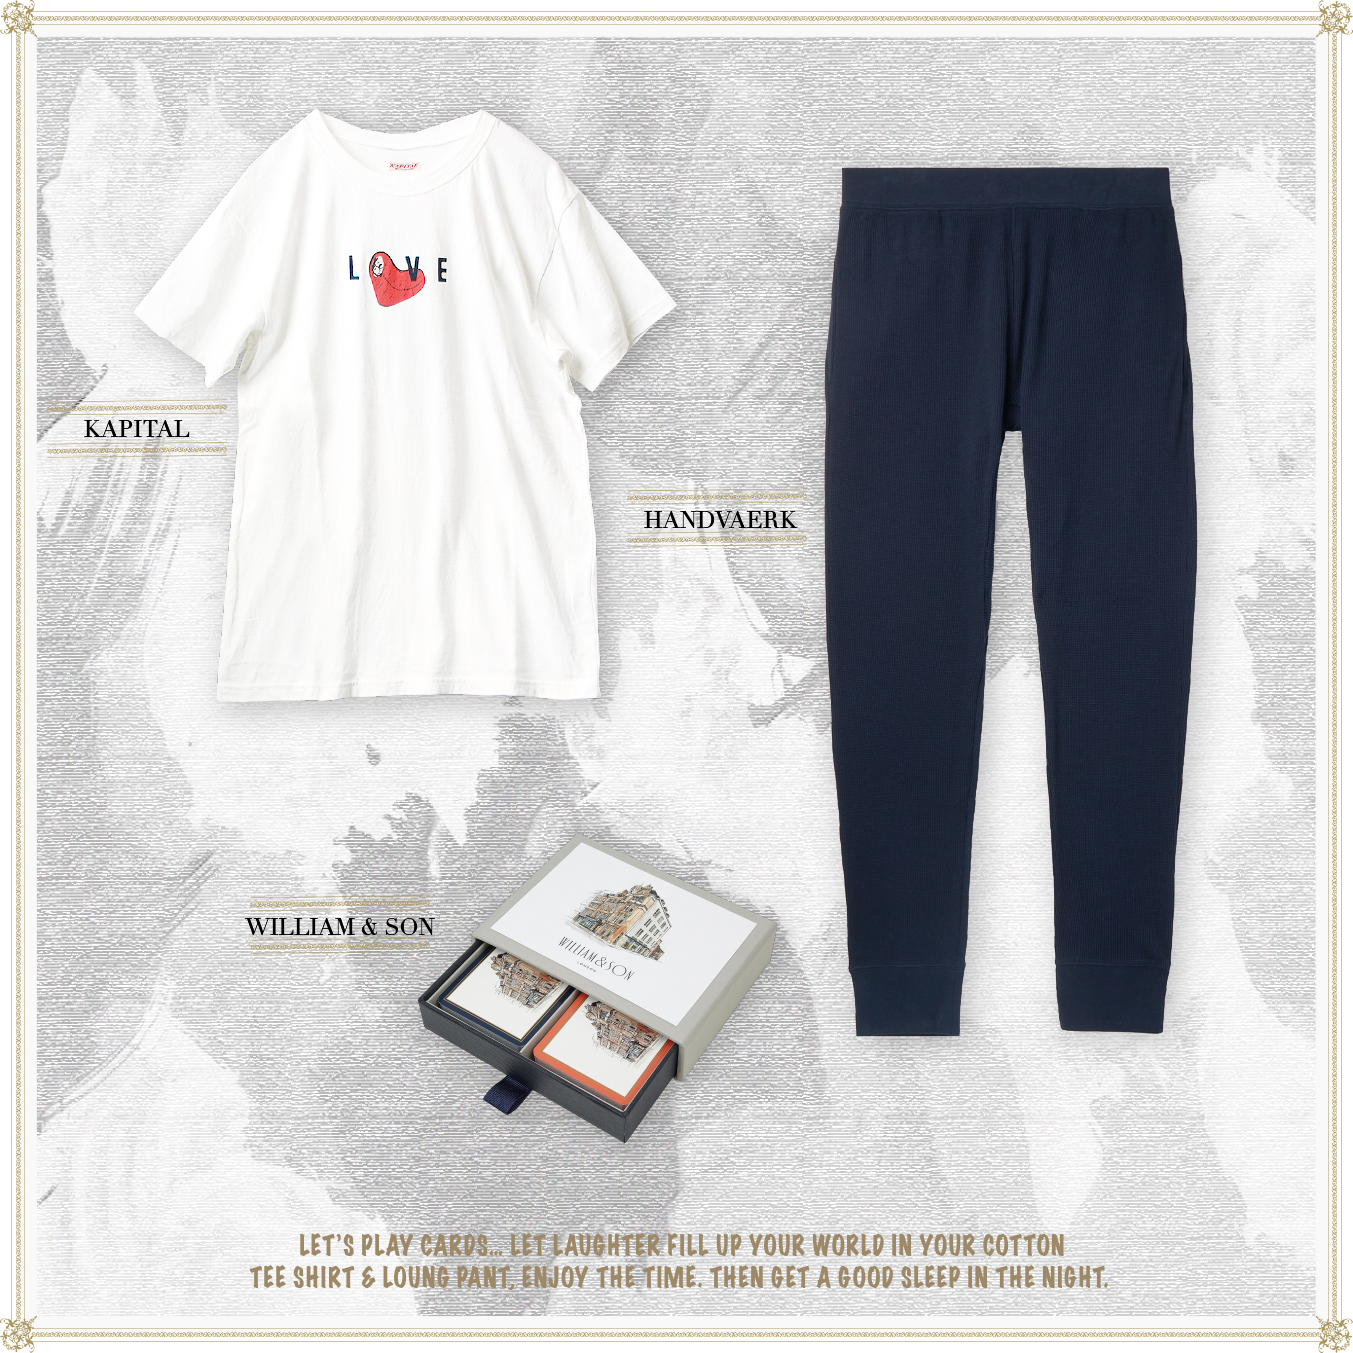 KAPITAL, HANDWAERK, WILLIAM & SONS - LET’S PLAY CARDS… LET LAUGHTER FILL UP YOUR WORLD IN YOUR COTTON TEE SHIRT & LOUNG PANT, ENJOY THE TIME. THEN GET A GOOD SLEEP IN THE NIGHT.